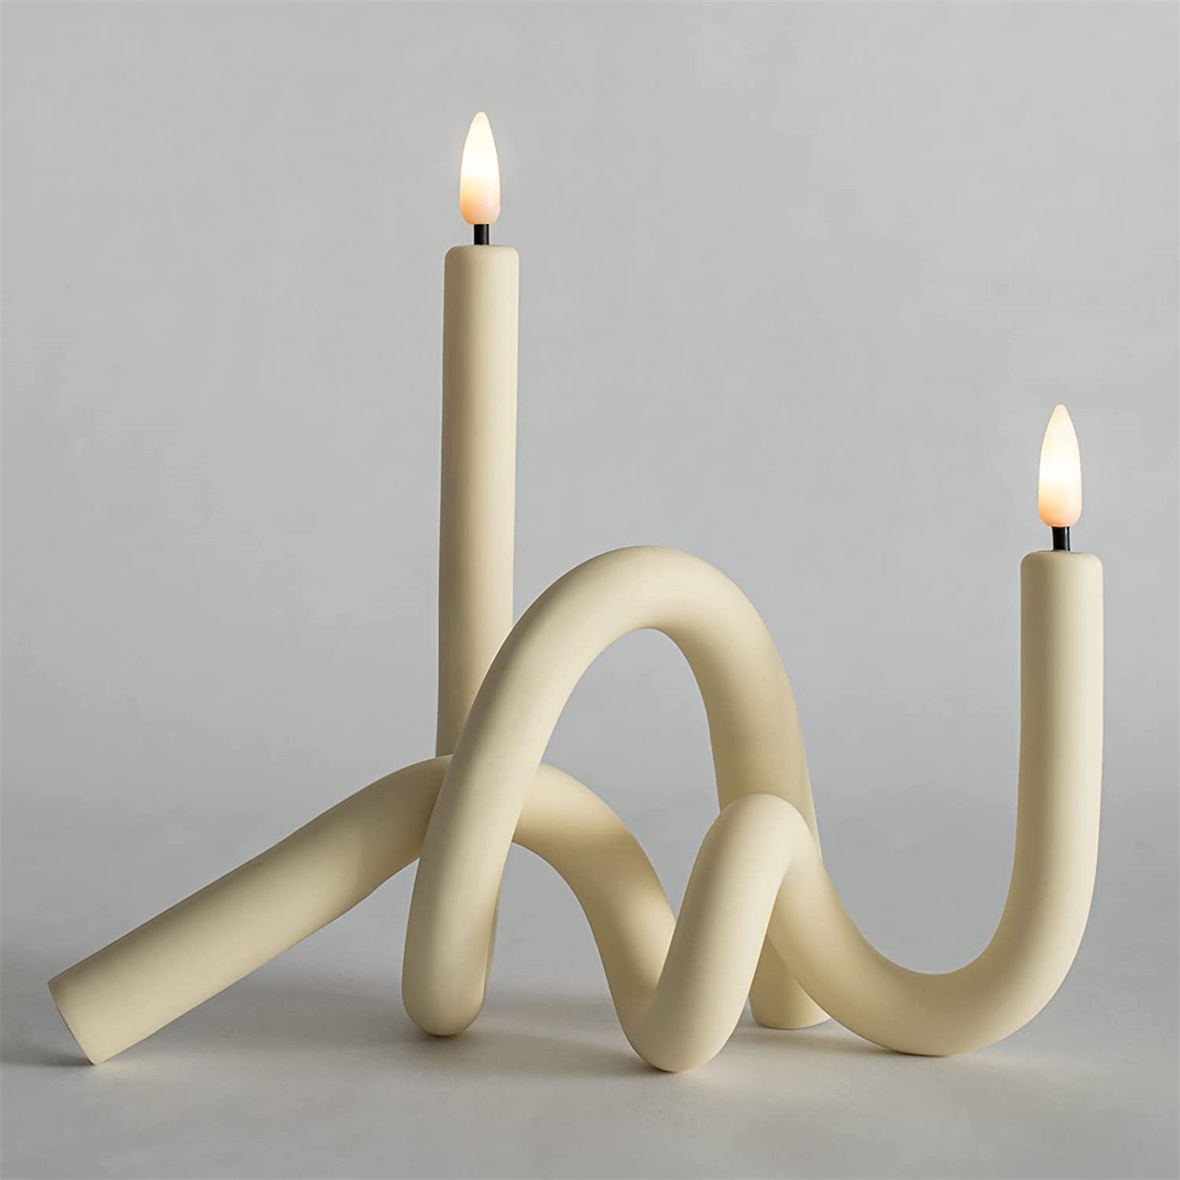 Yongmao Flameless Taper Candles Twisted Rechargeable LED Electric Fake Flickering Candles for Home Wedding Party Christmas Decoration (2Pcs, Ivory)